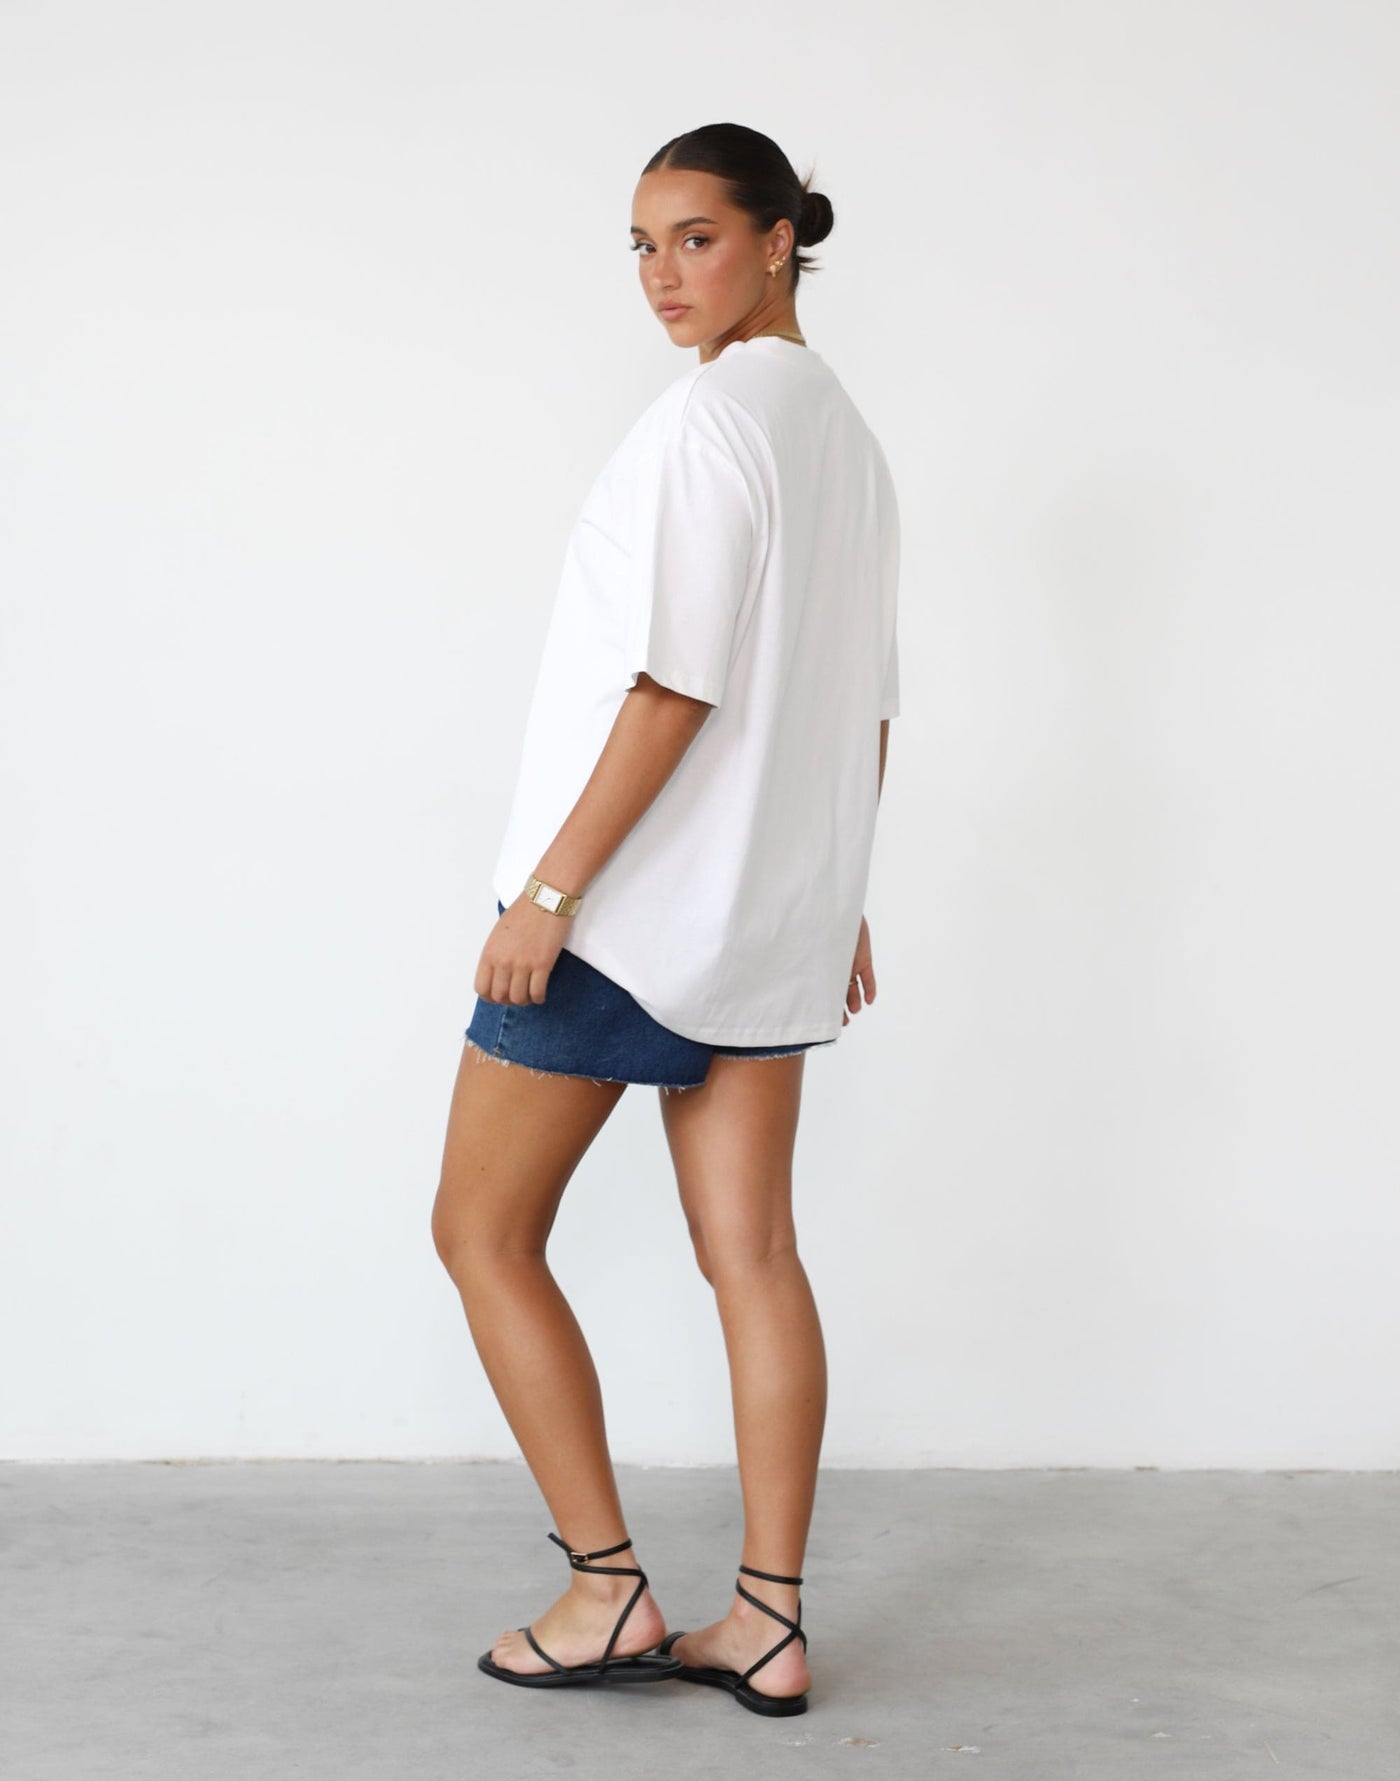 Luca Oversized Tee (White) - Relaxed Oversized T-Shirt - Women's Top - Charcoal Clothing